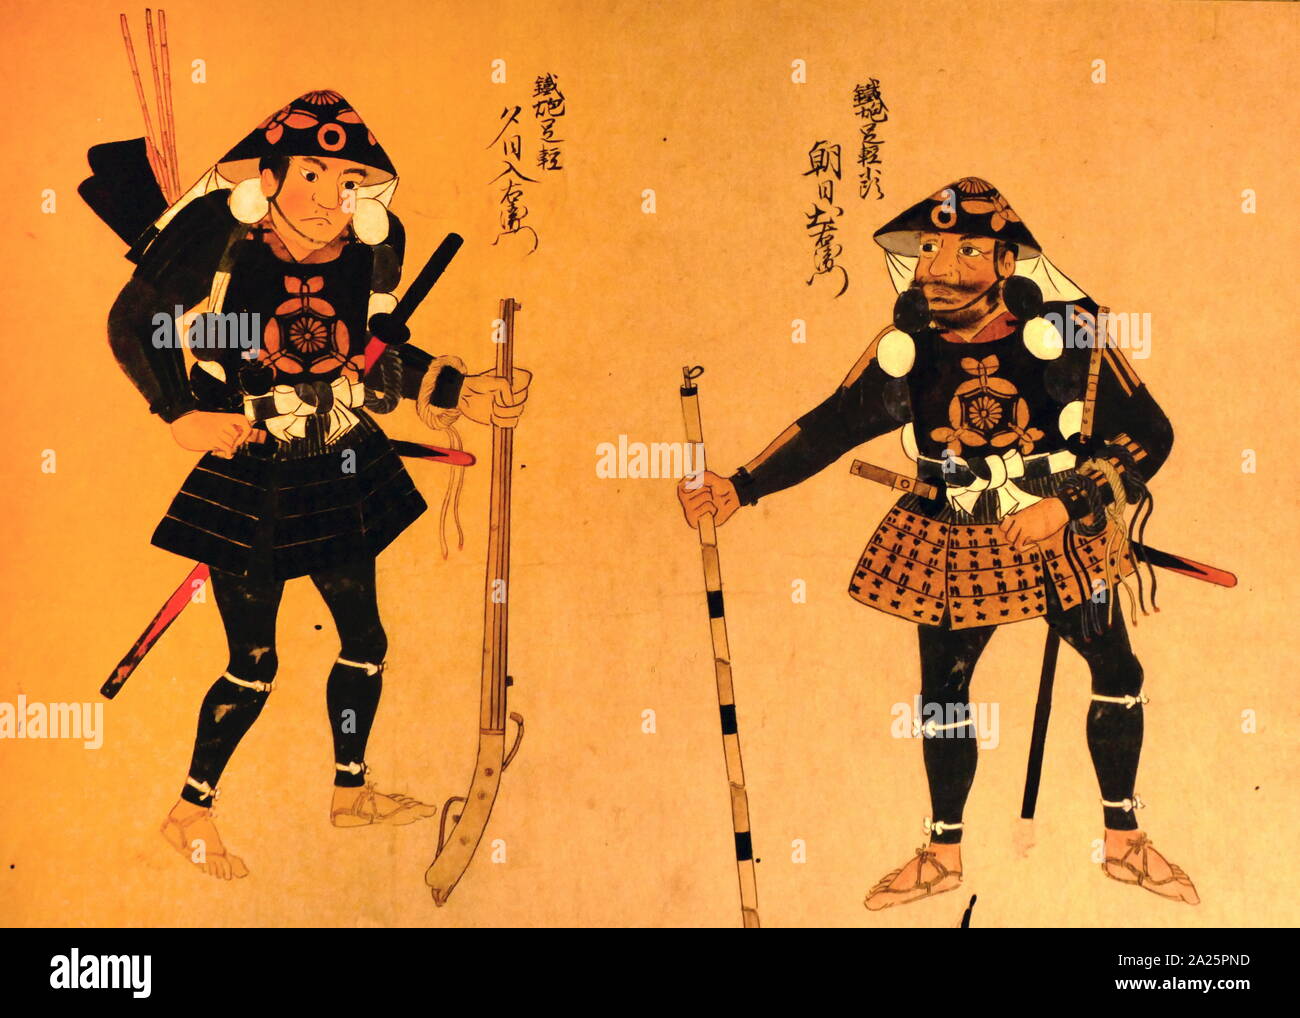 Illustration from Zohyo Monogatari, Tales of the Foot Soldiers, c.1657-1684, a 17th-century Japanese Samurai work Stock Photo